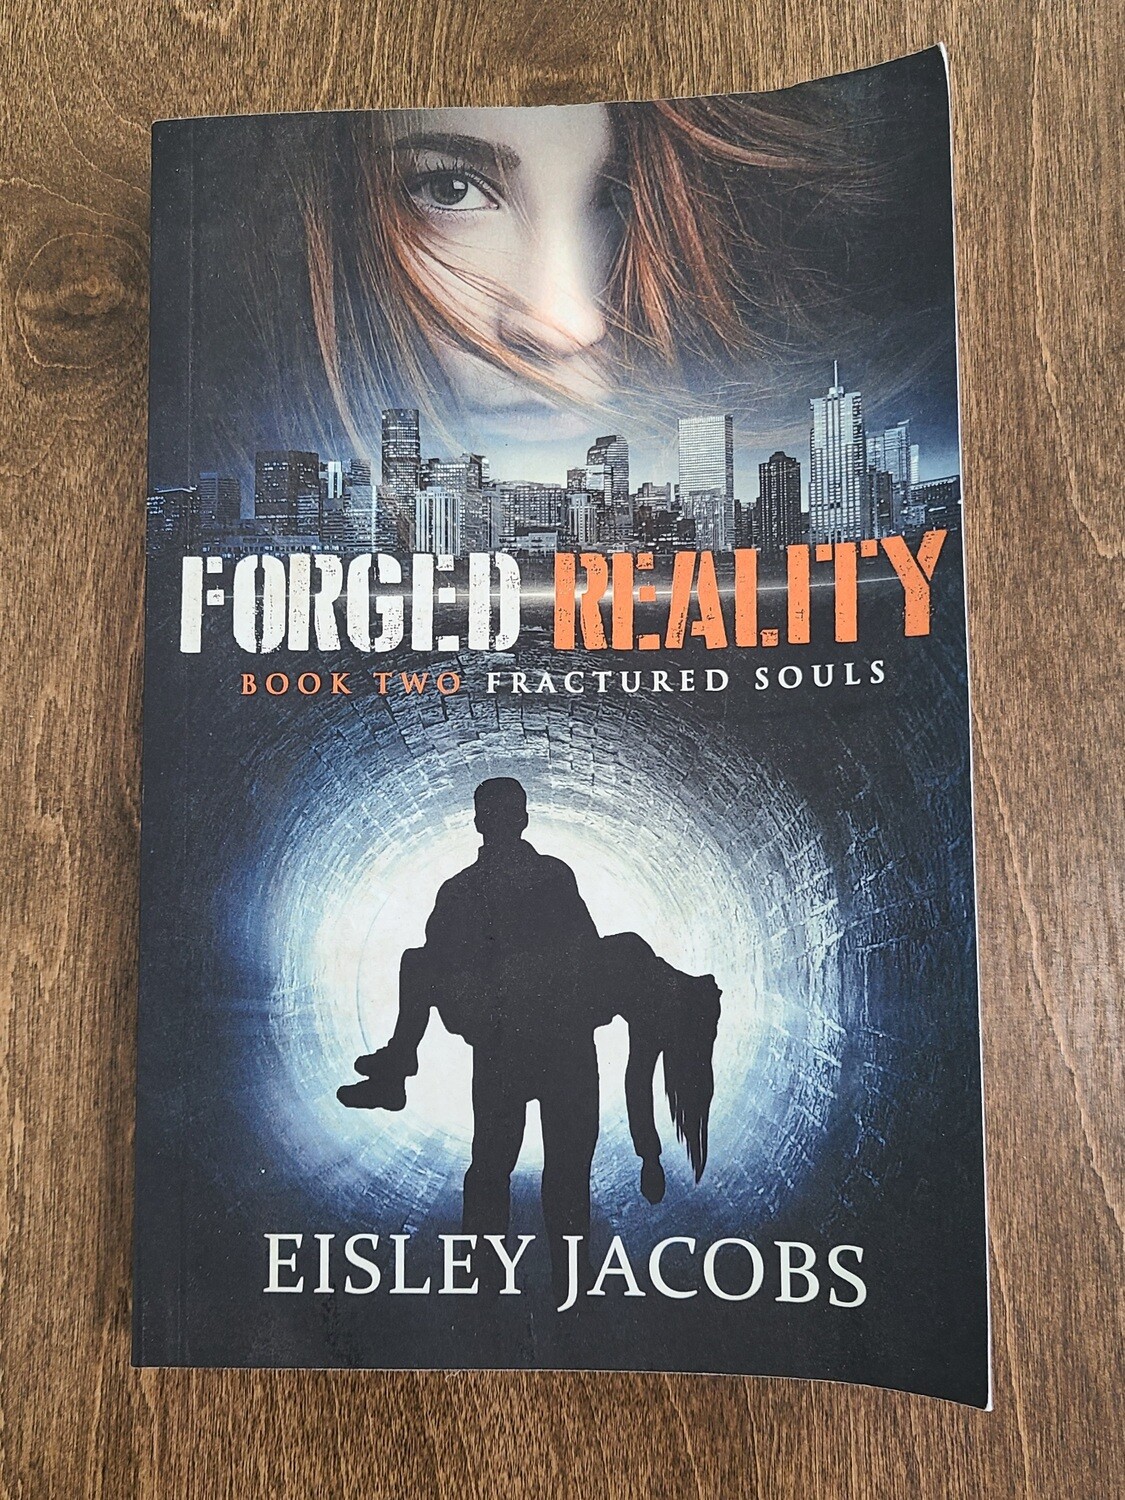 Forged Reality by Eisley Jacobs